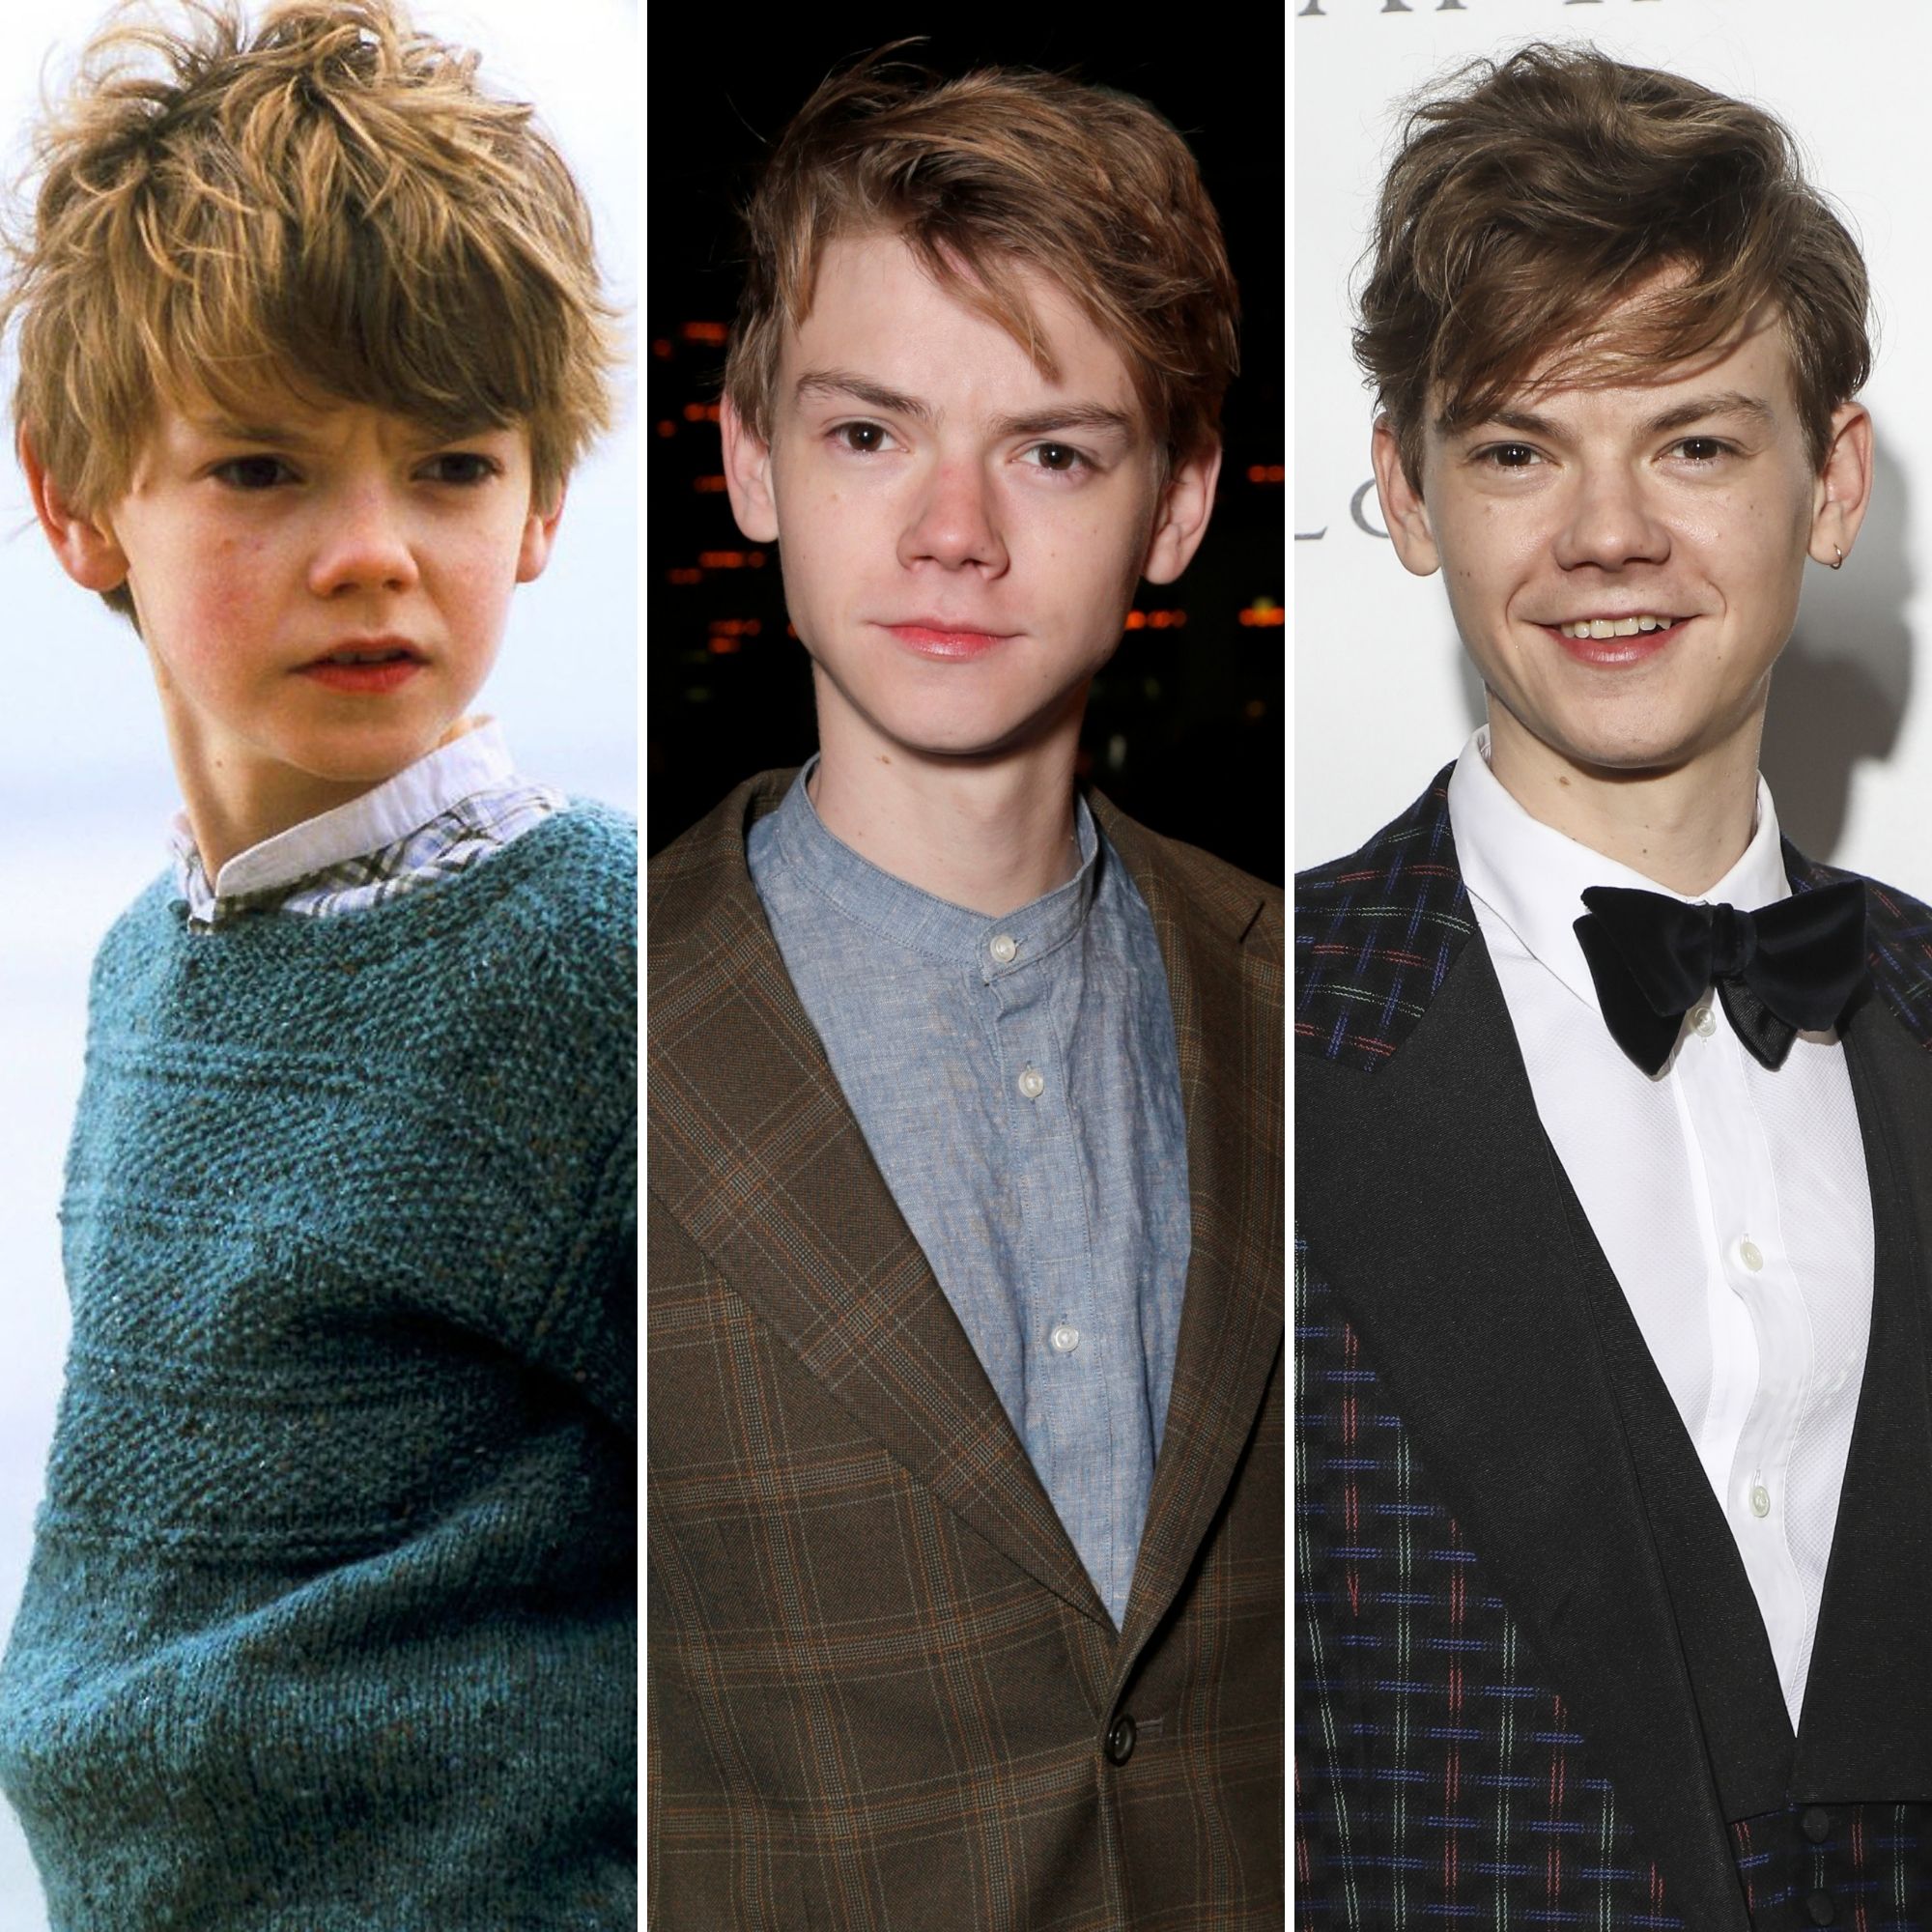 Thomas BrodieSangster's Transformation From Child Actor to Now!